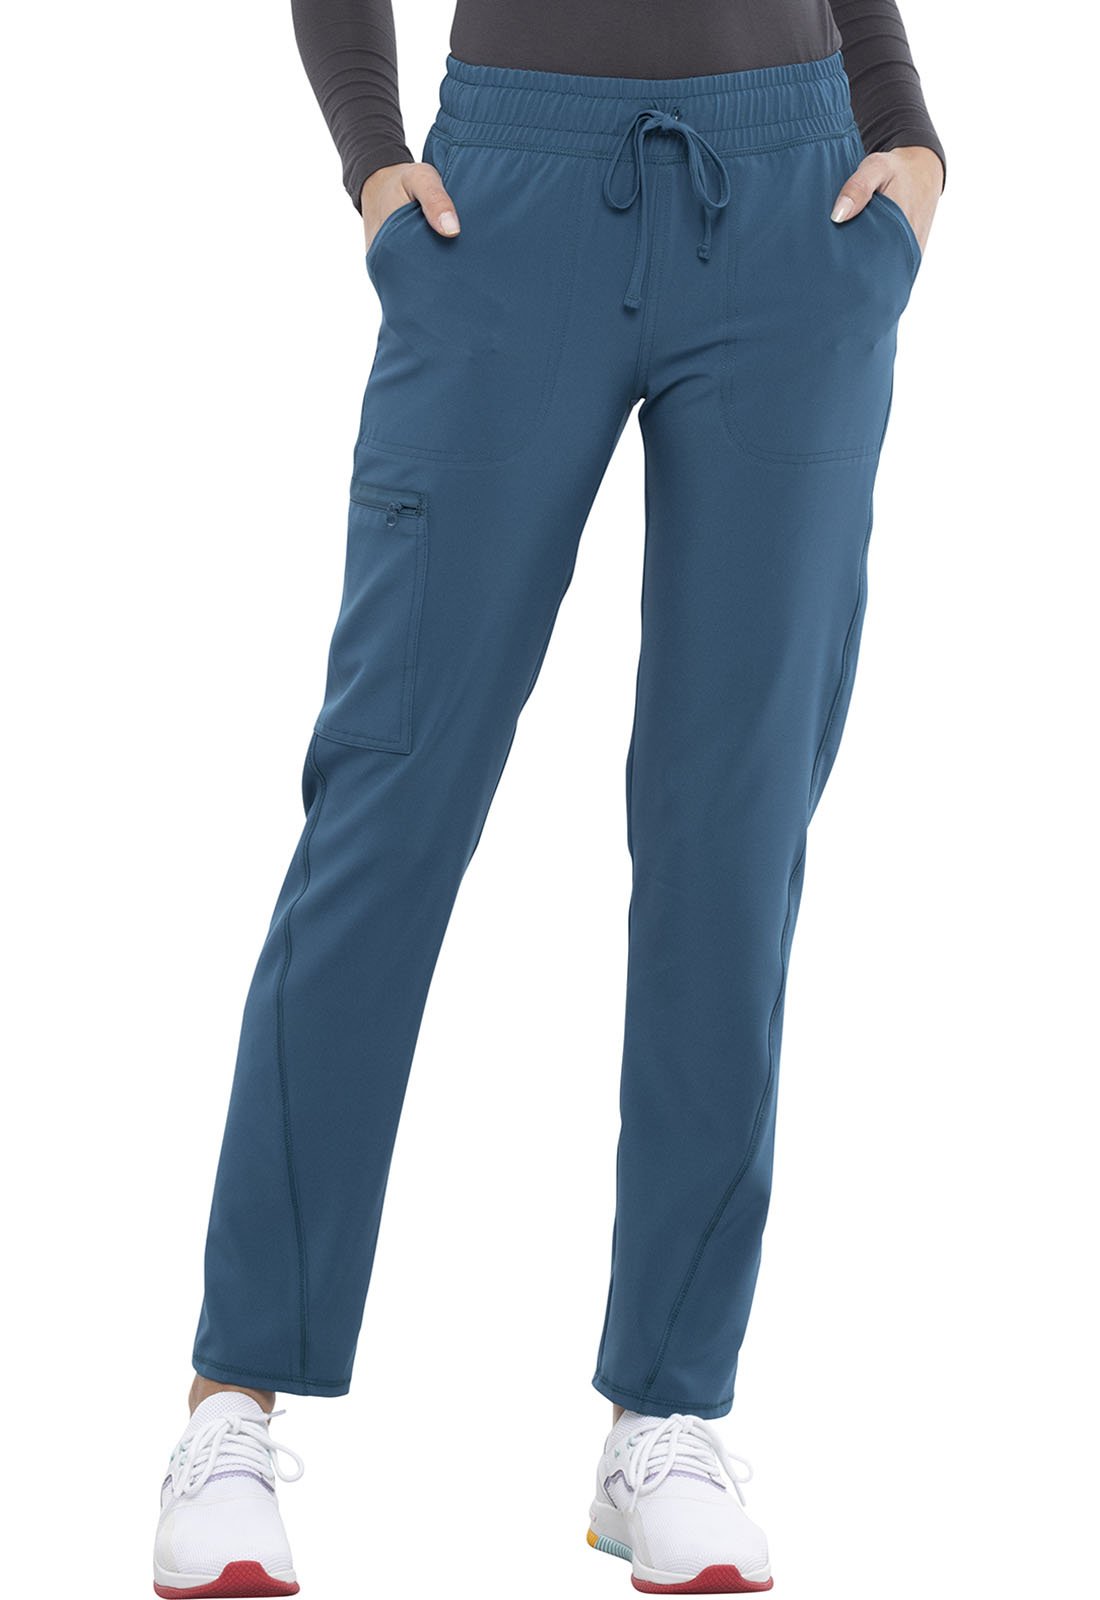 Buy Cotton Drawstring Pants Online in New Zealand